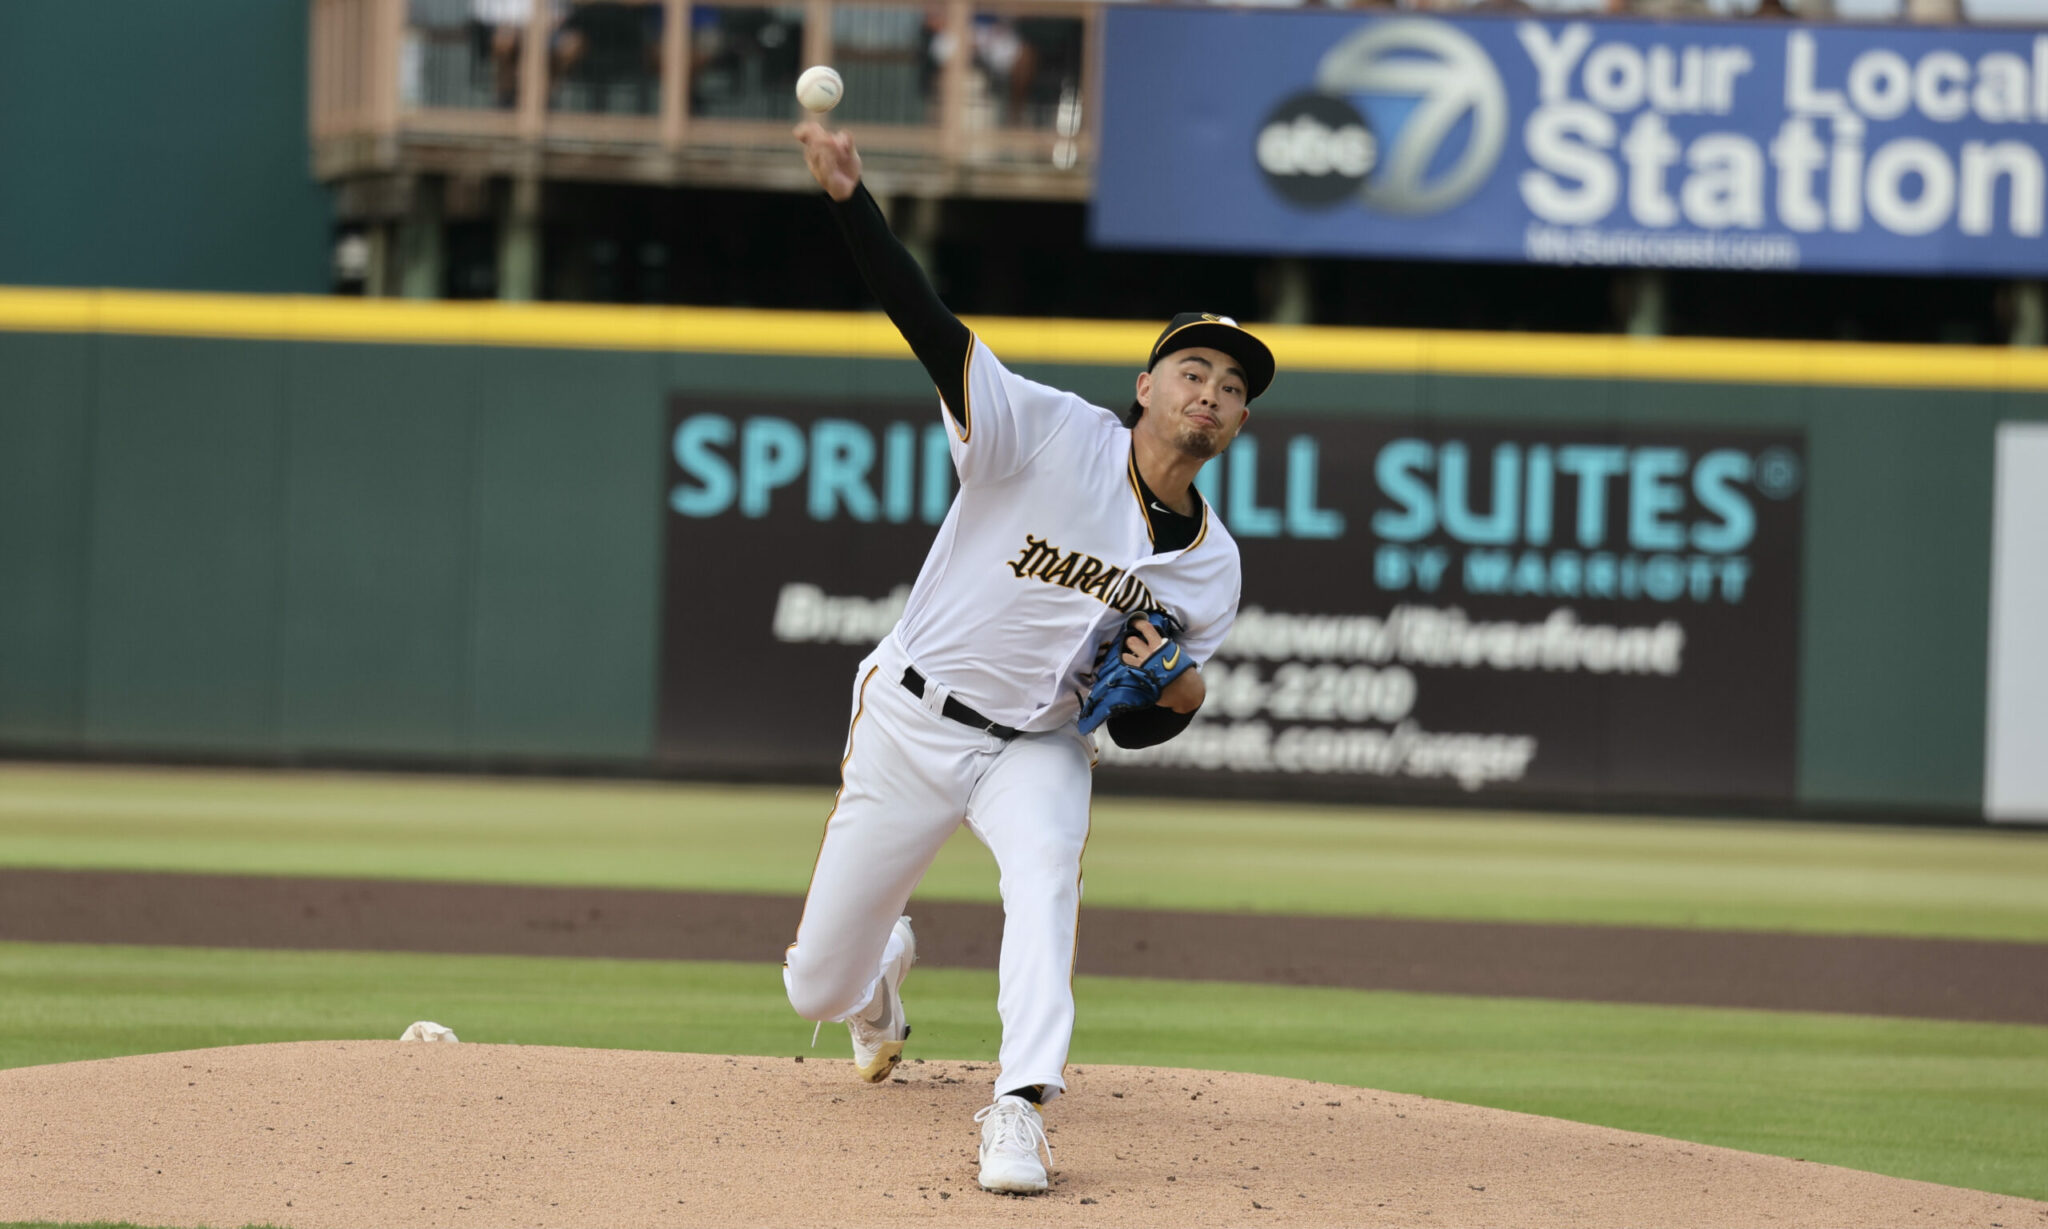 Prospect Roundtable: The Rest of the Bradenton Pitching Staff